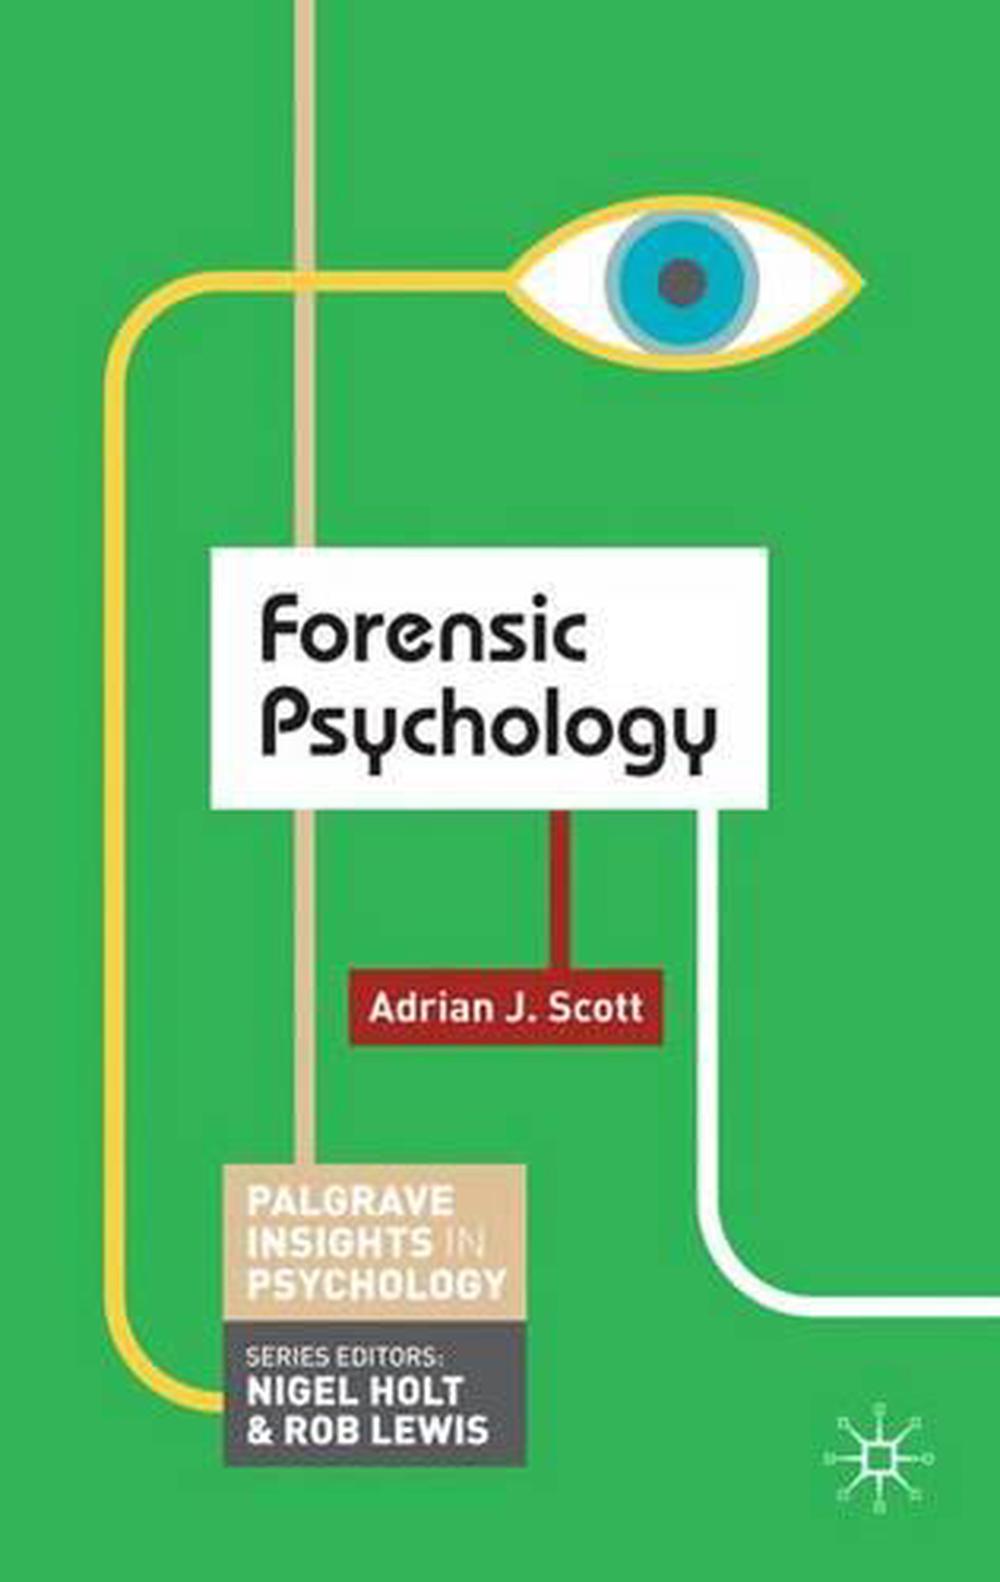 research topics on forensic psychology